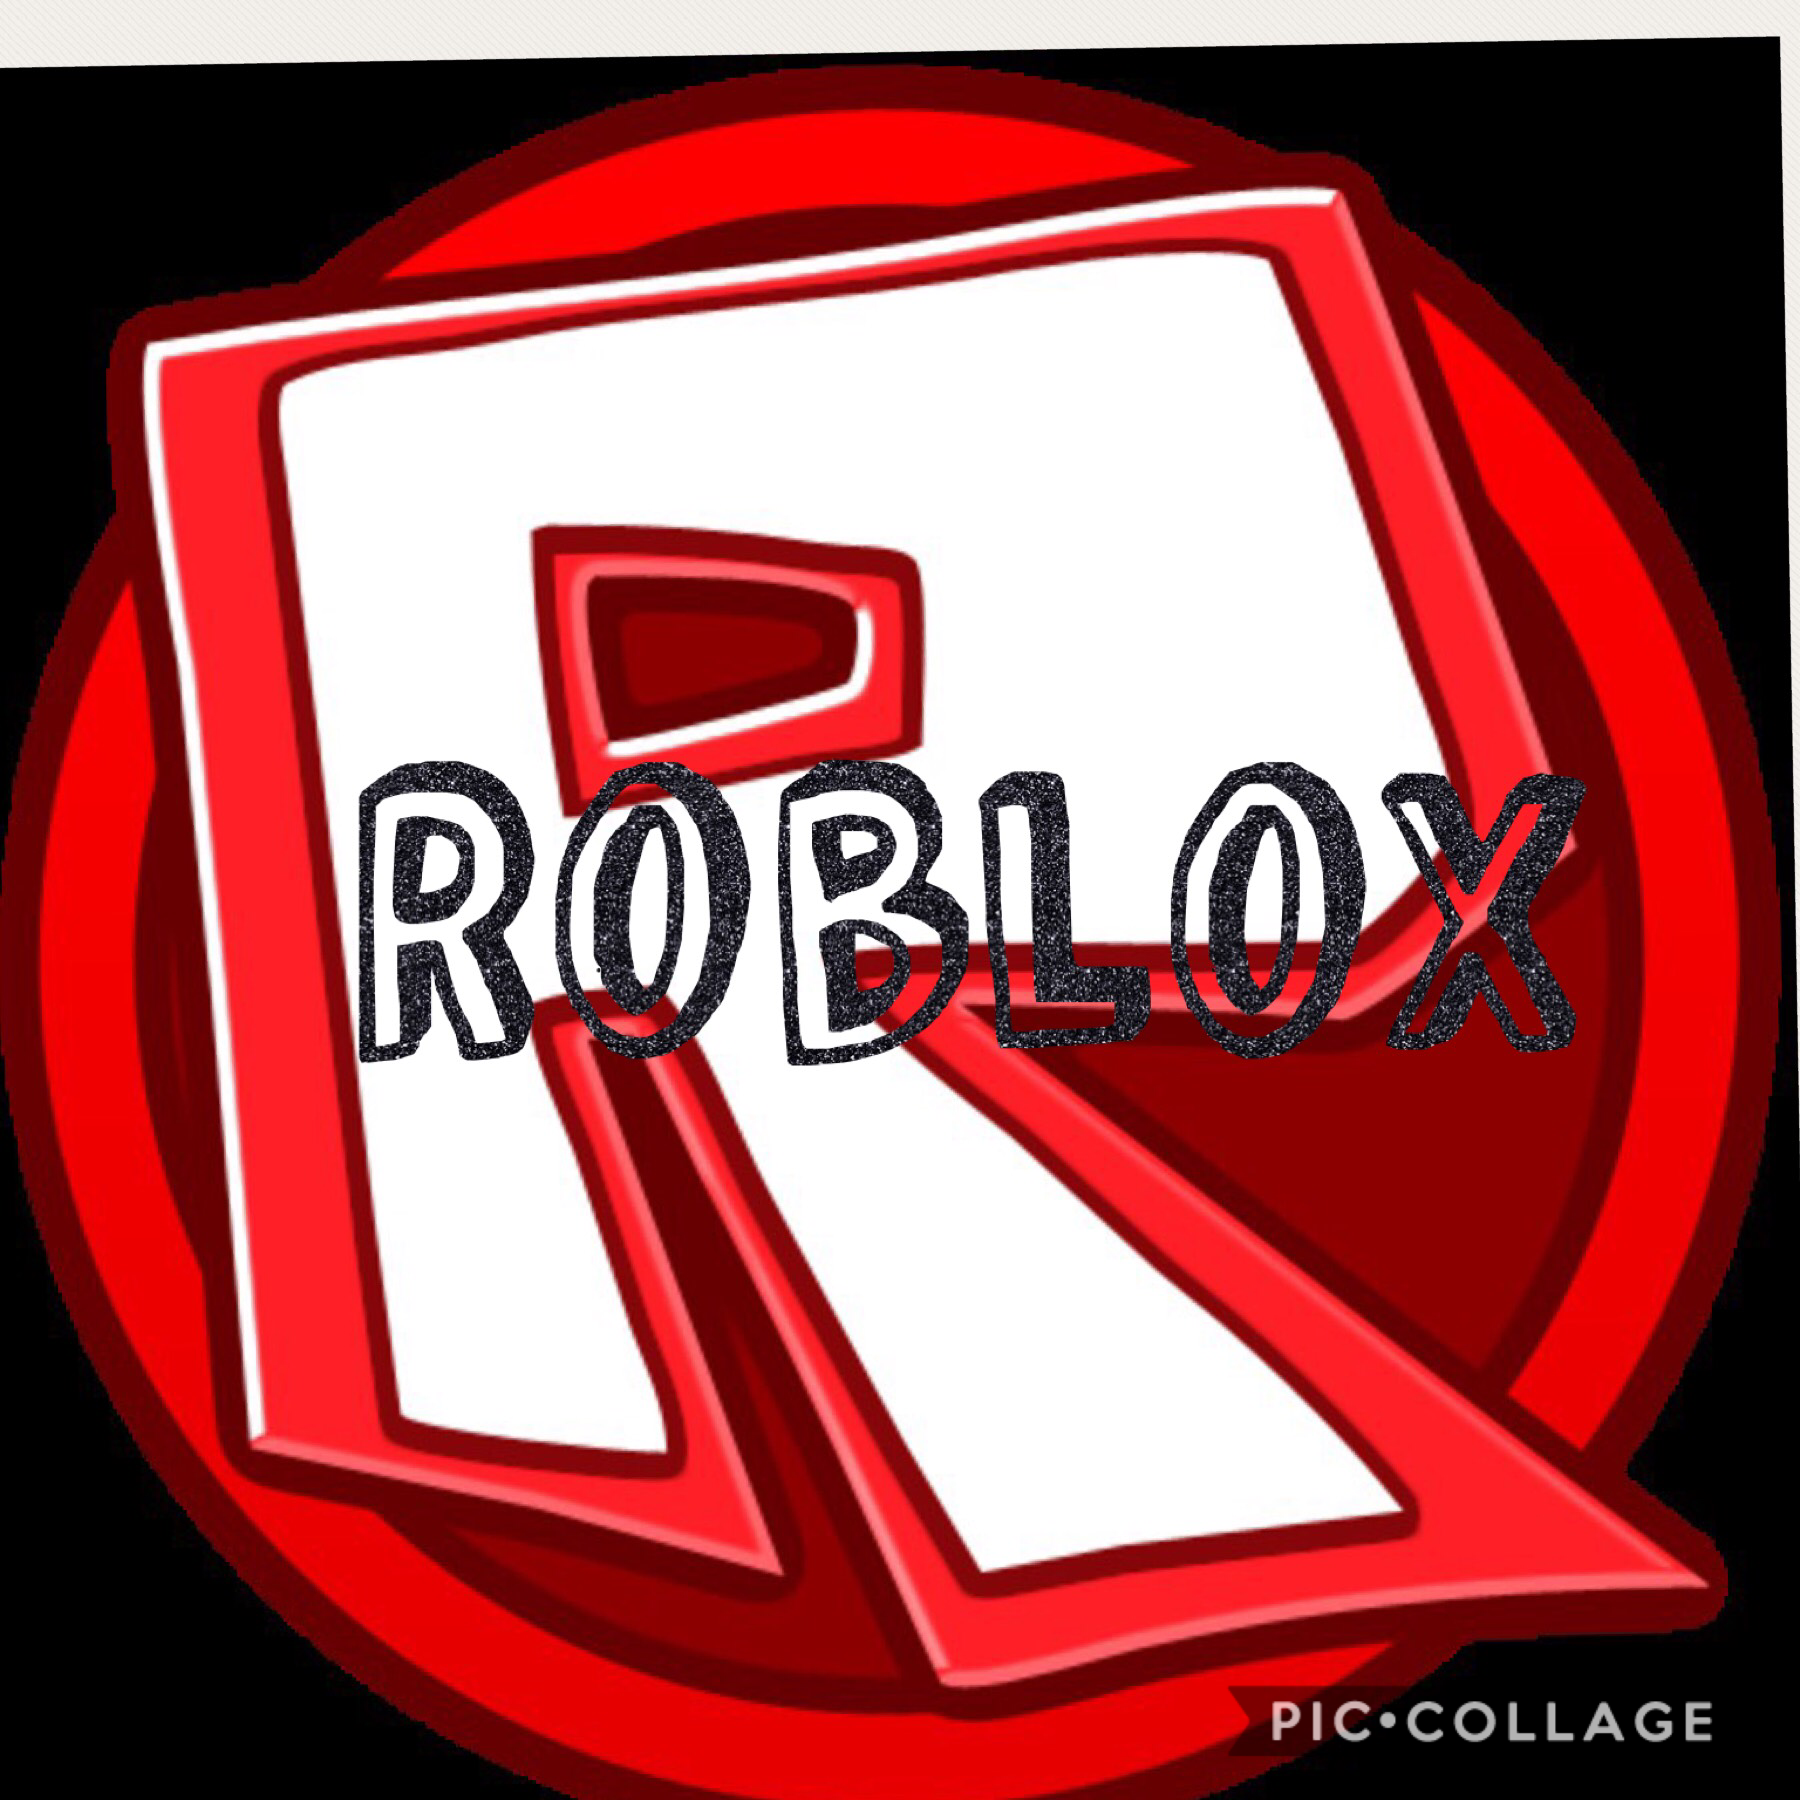 Tell me in the comments if you like roblox